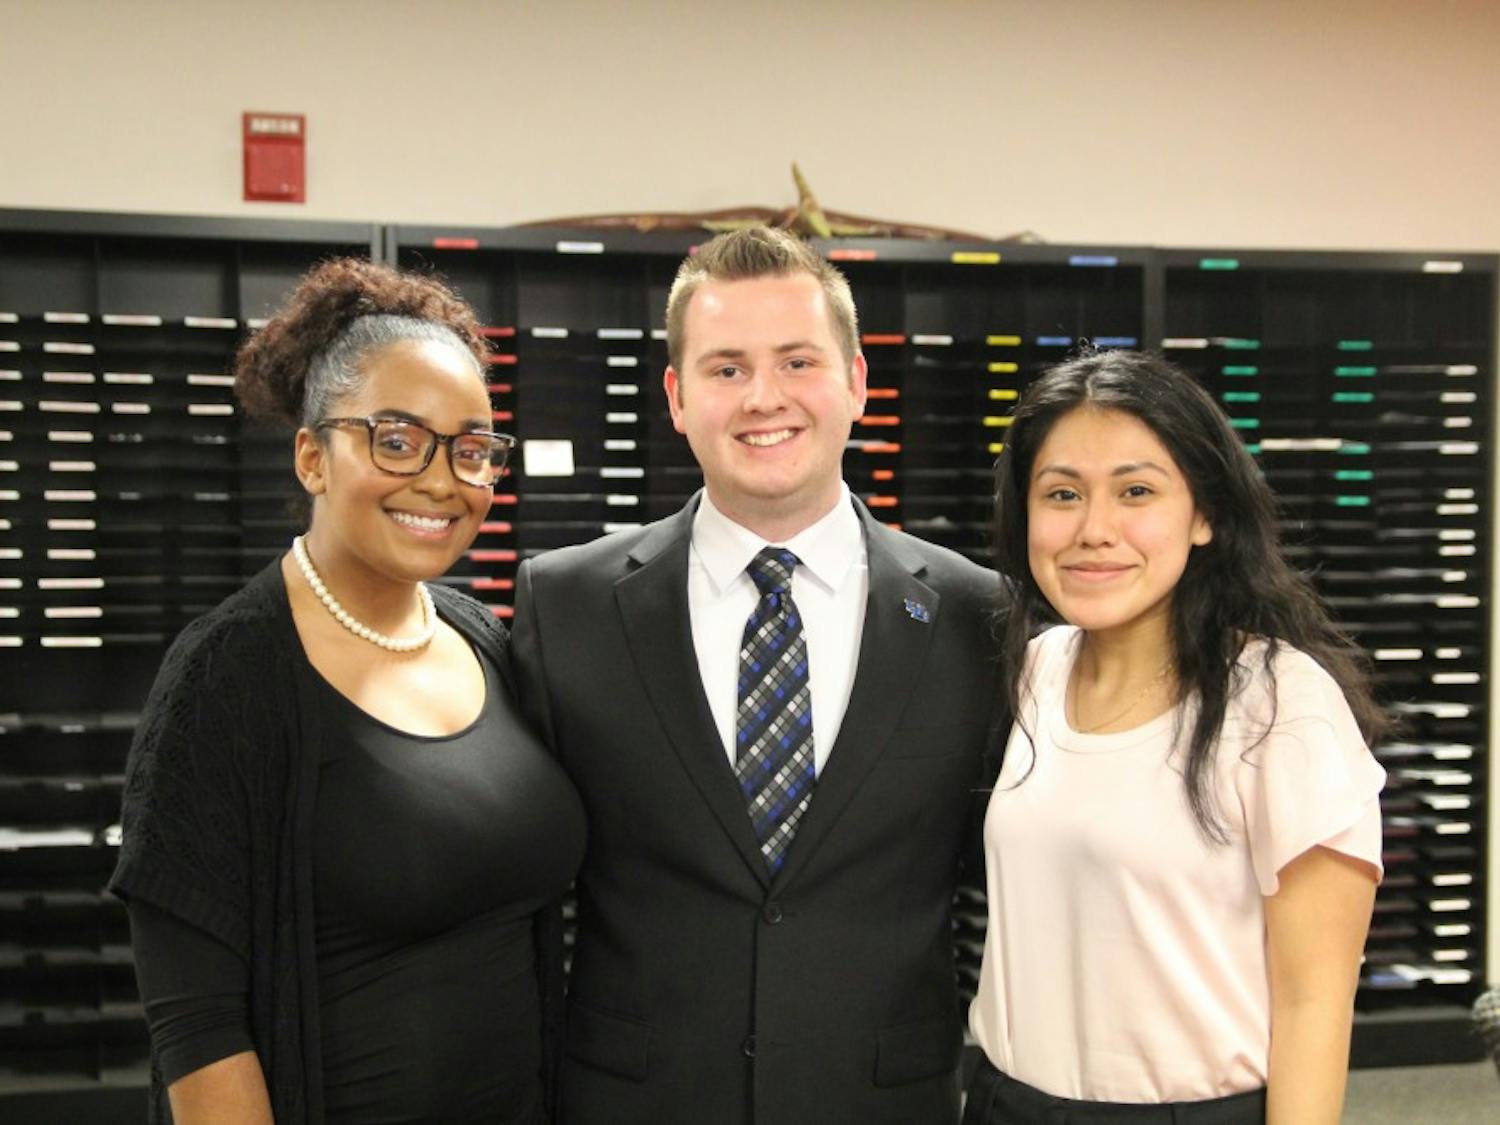 SA announced&nbsp;Anyssa Evelyn, Gunnar Haberl and&nbsp;Tanahiry Escamilla as the 2018-2019 SA executive board. The R.E.A.L. Party&nbsp;candidates ran unopposed and will assume their positions in May.&nbsp;